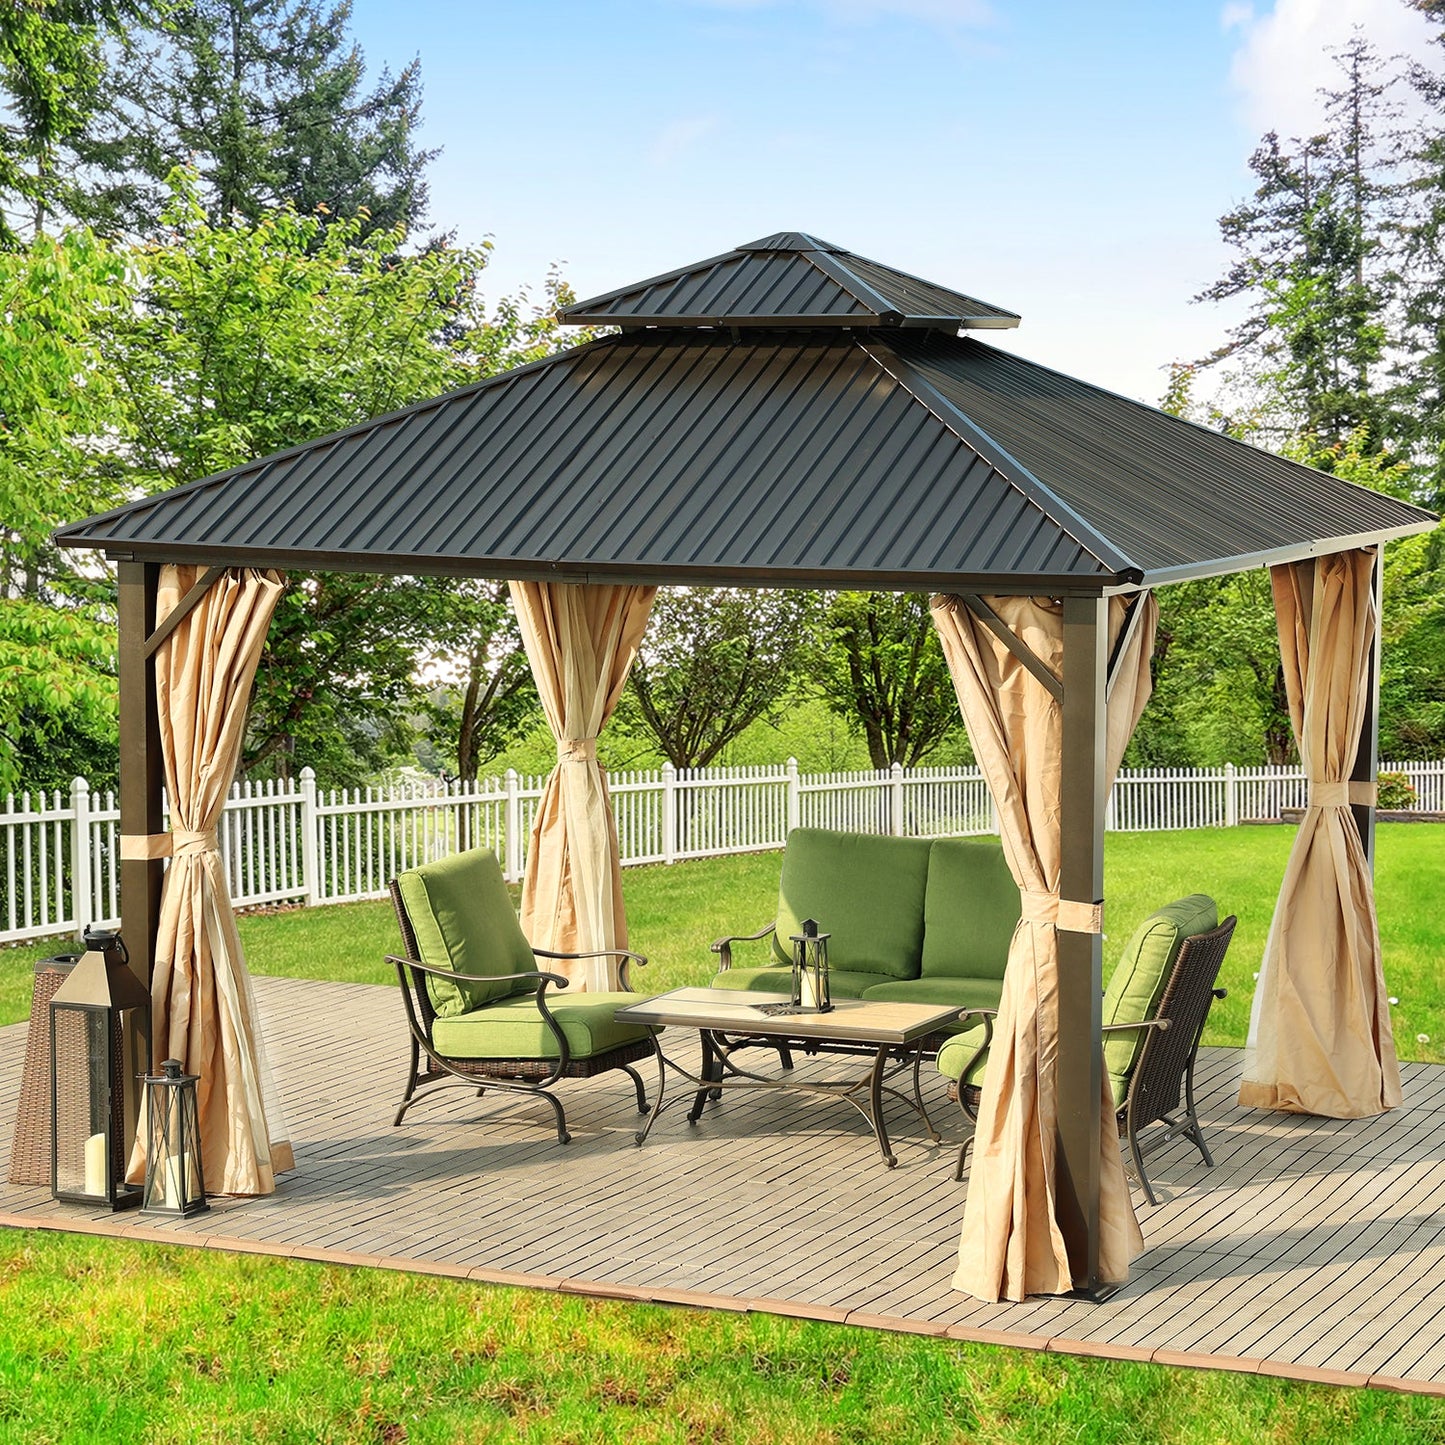 12 x 12 ft. Aluminum Frame Hardtop Roof Gazebo, Outdoor  2-Tier Metal Roof Gazebo with Mosquito Netting and Curtains- Black Gazebo Aoodor LLC   